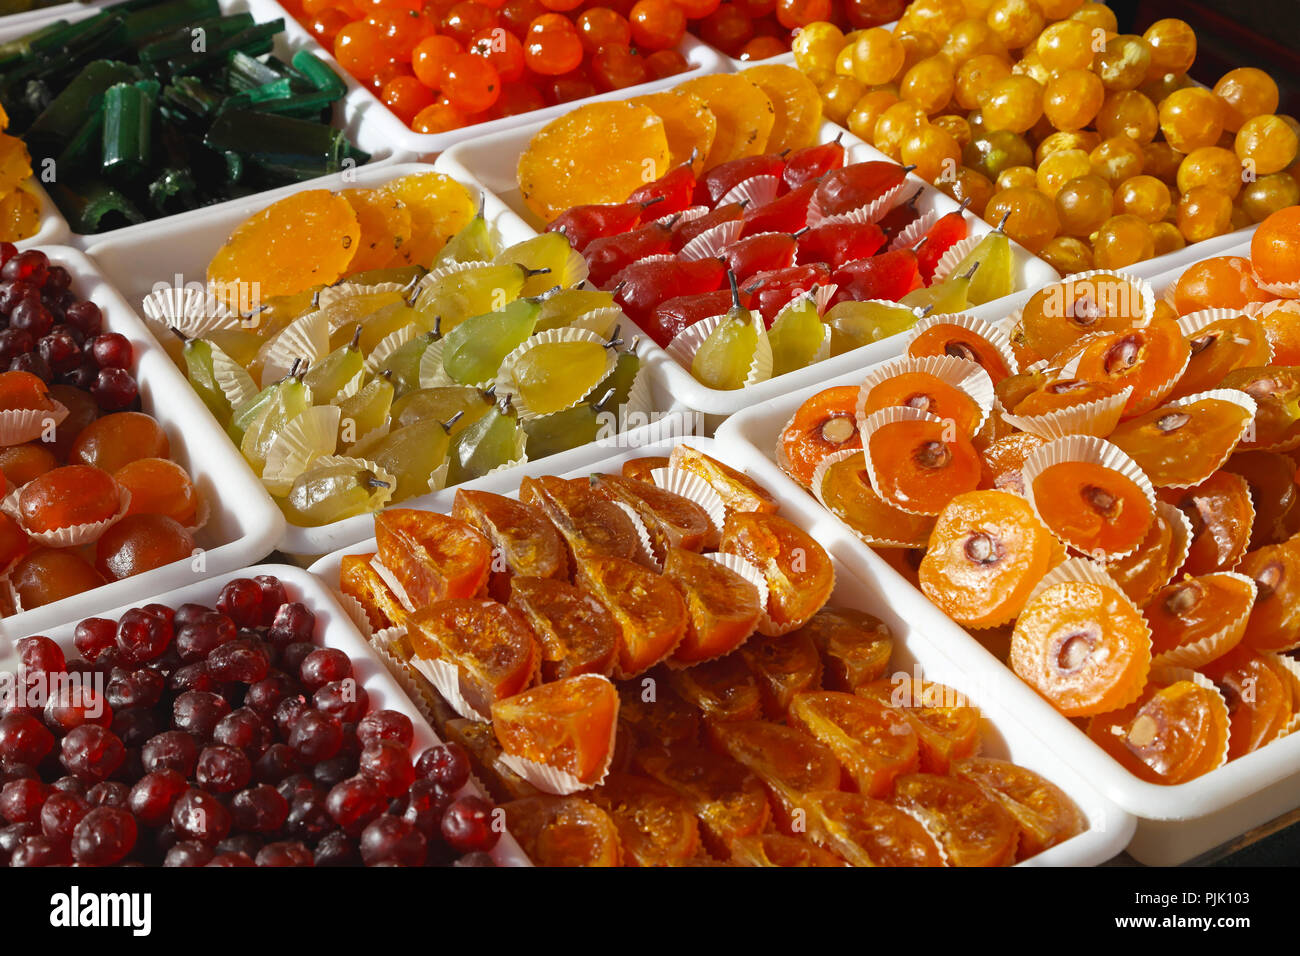 Candied fruits selection made with crystallised sugar Stock Photo